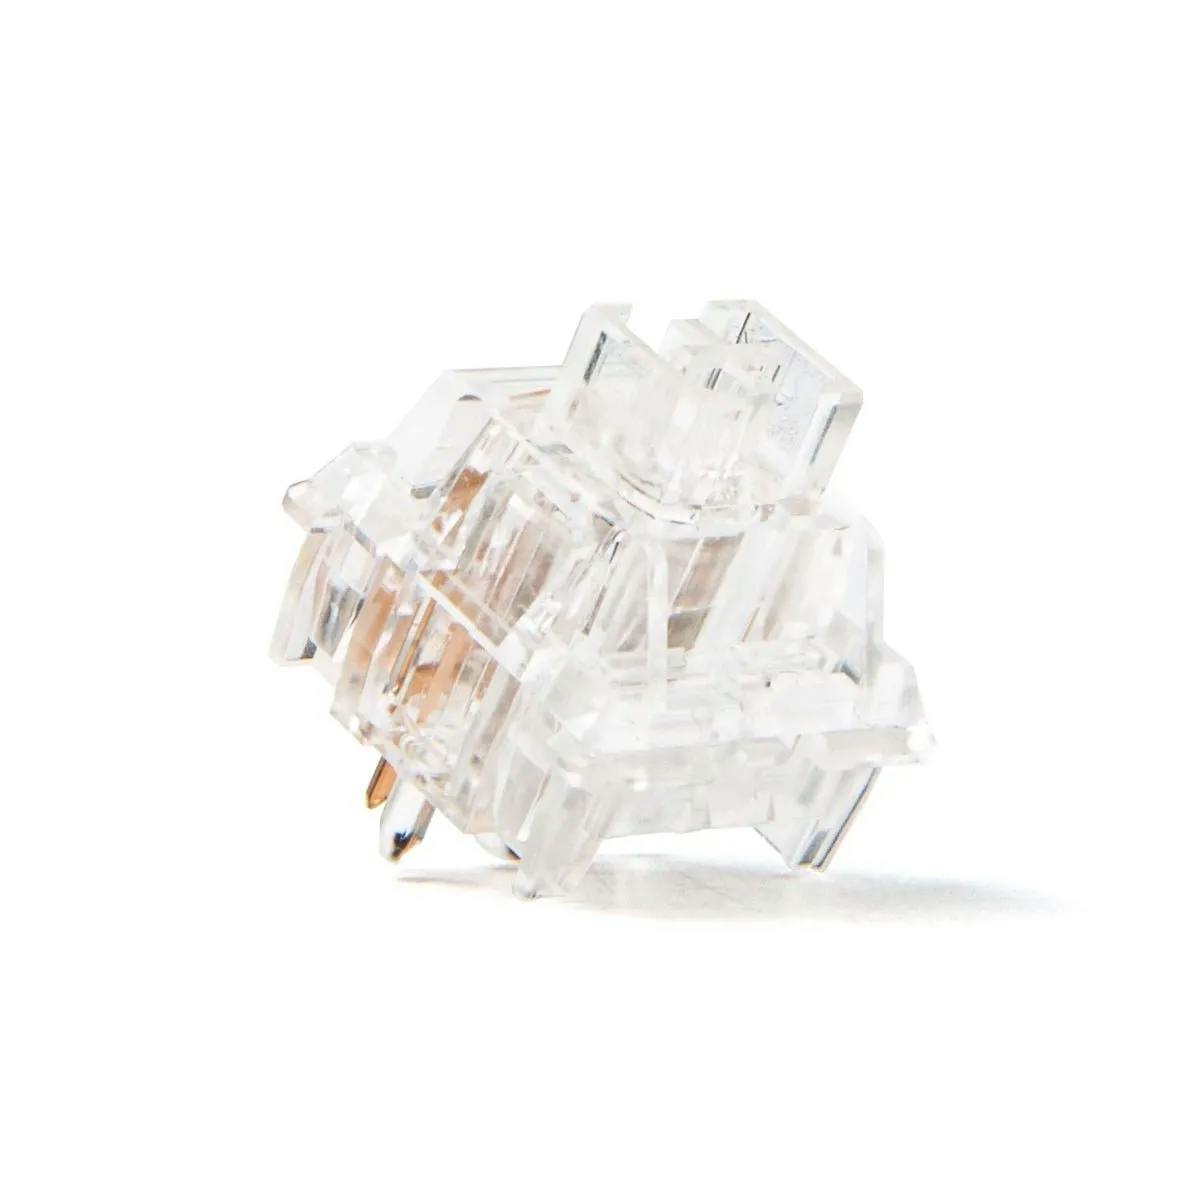 Image for Wuque WS Quartz Linear Switches